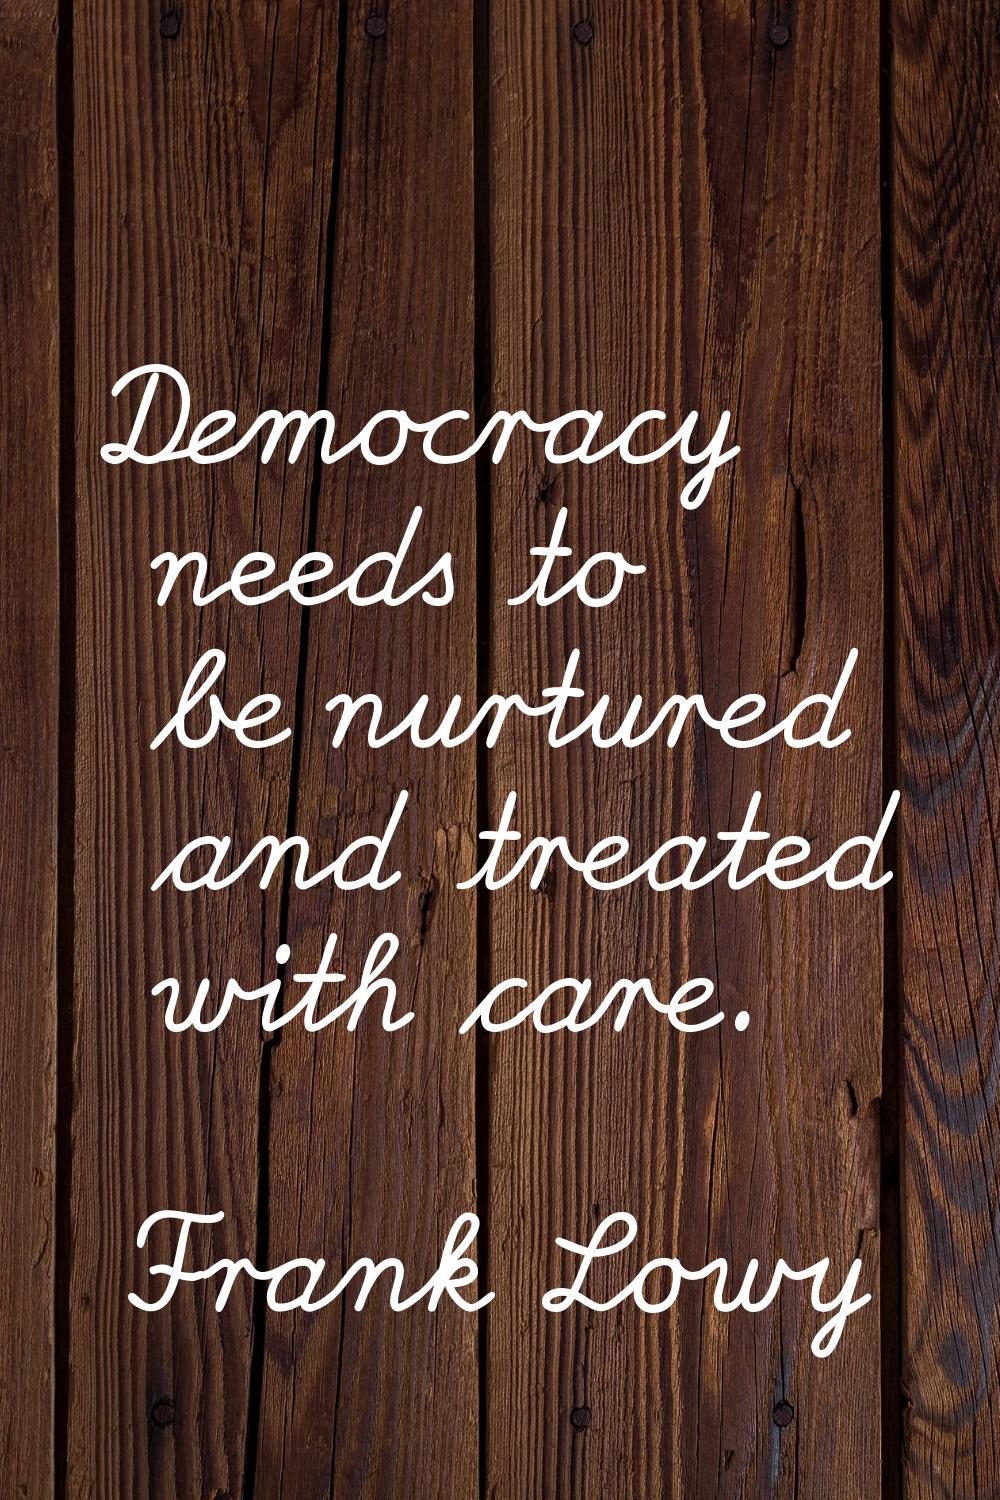 Democracy needs to be nurtured and treated with care.